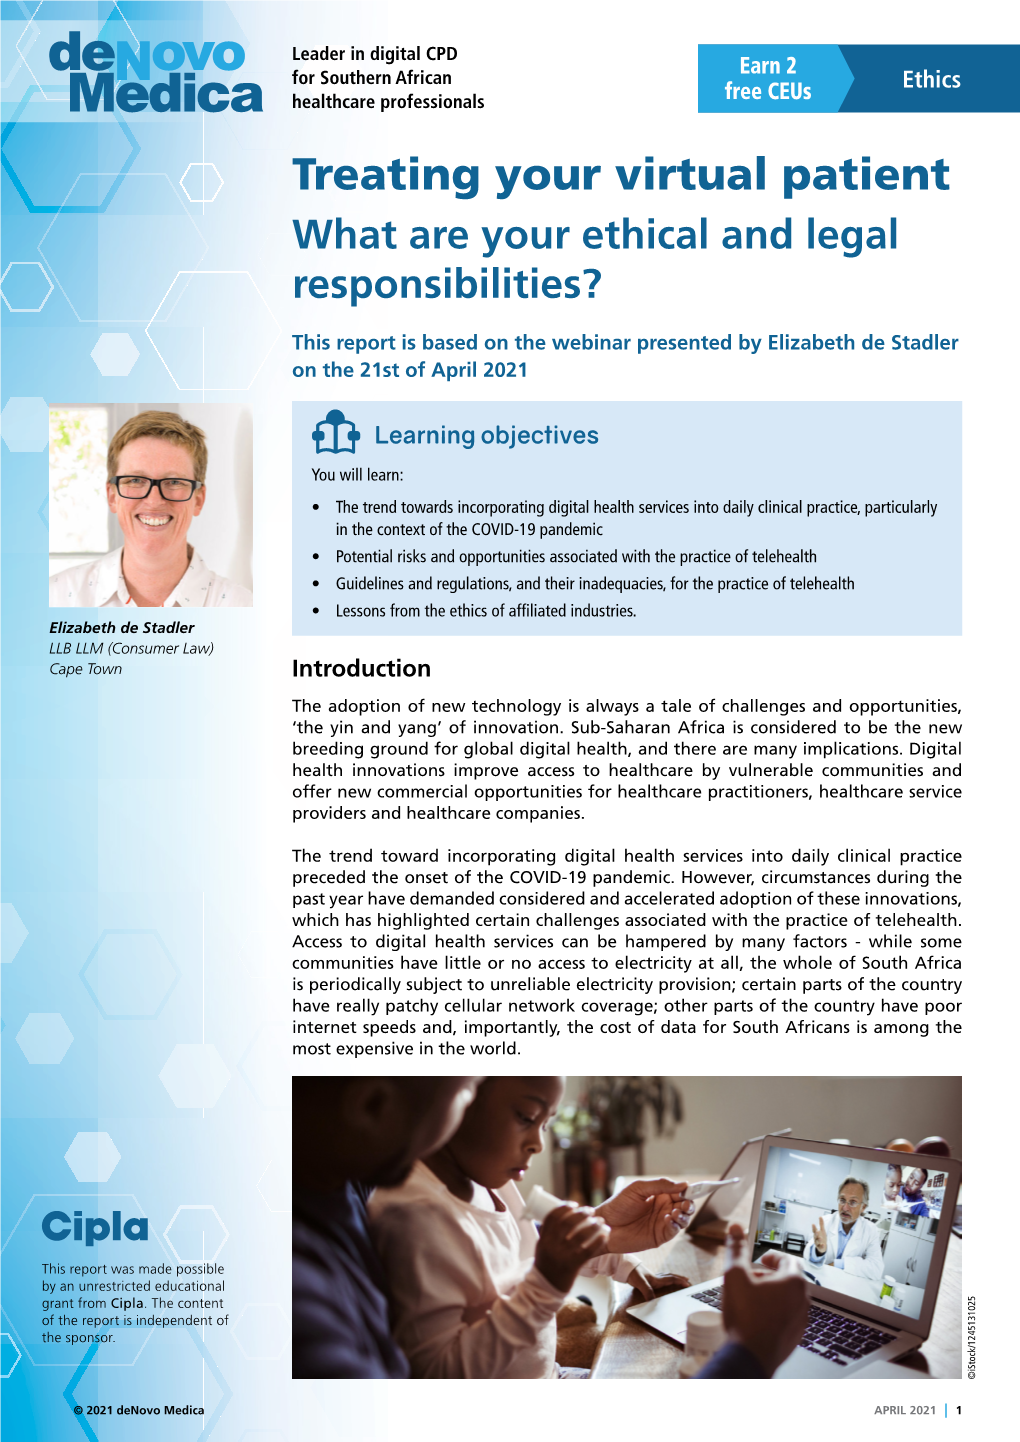 Treating Your Virtual Patient What Are Your Ethical and Legal Responsibilities?